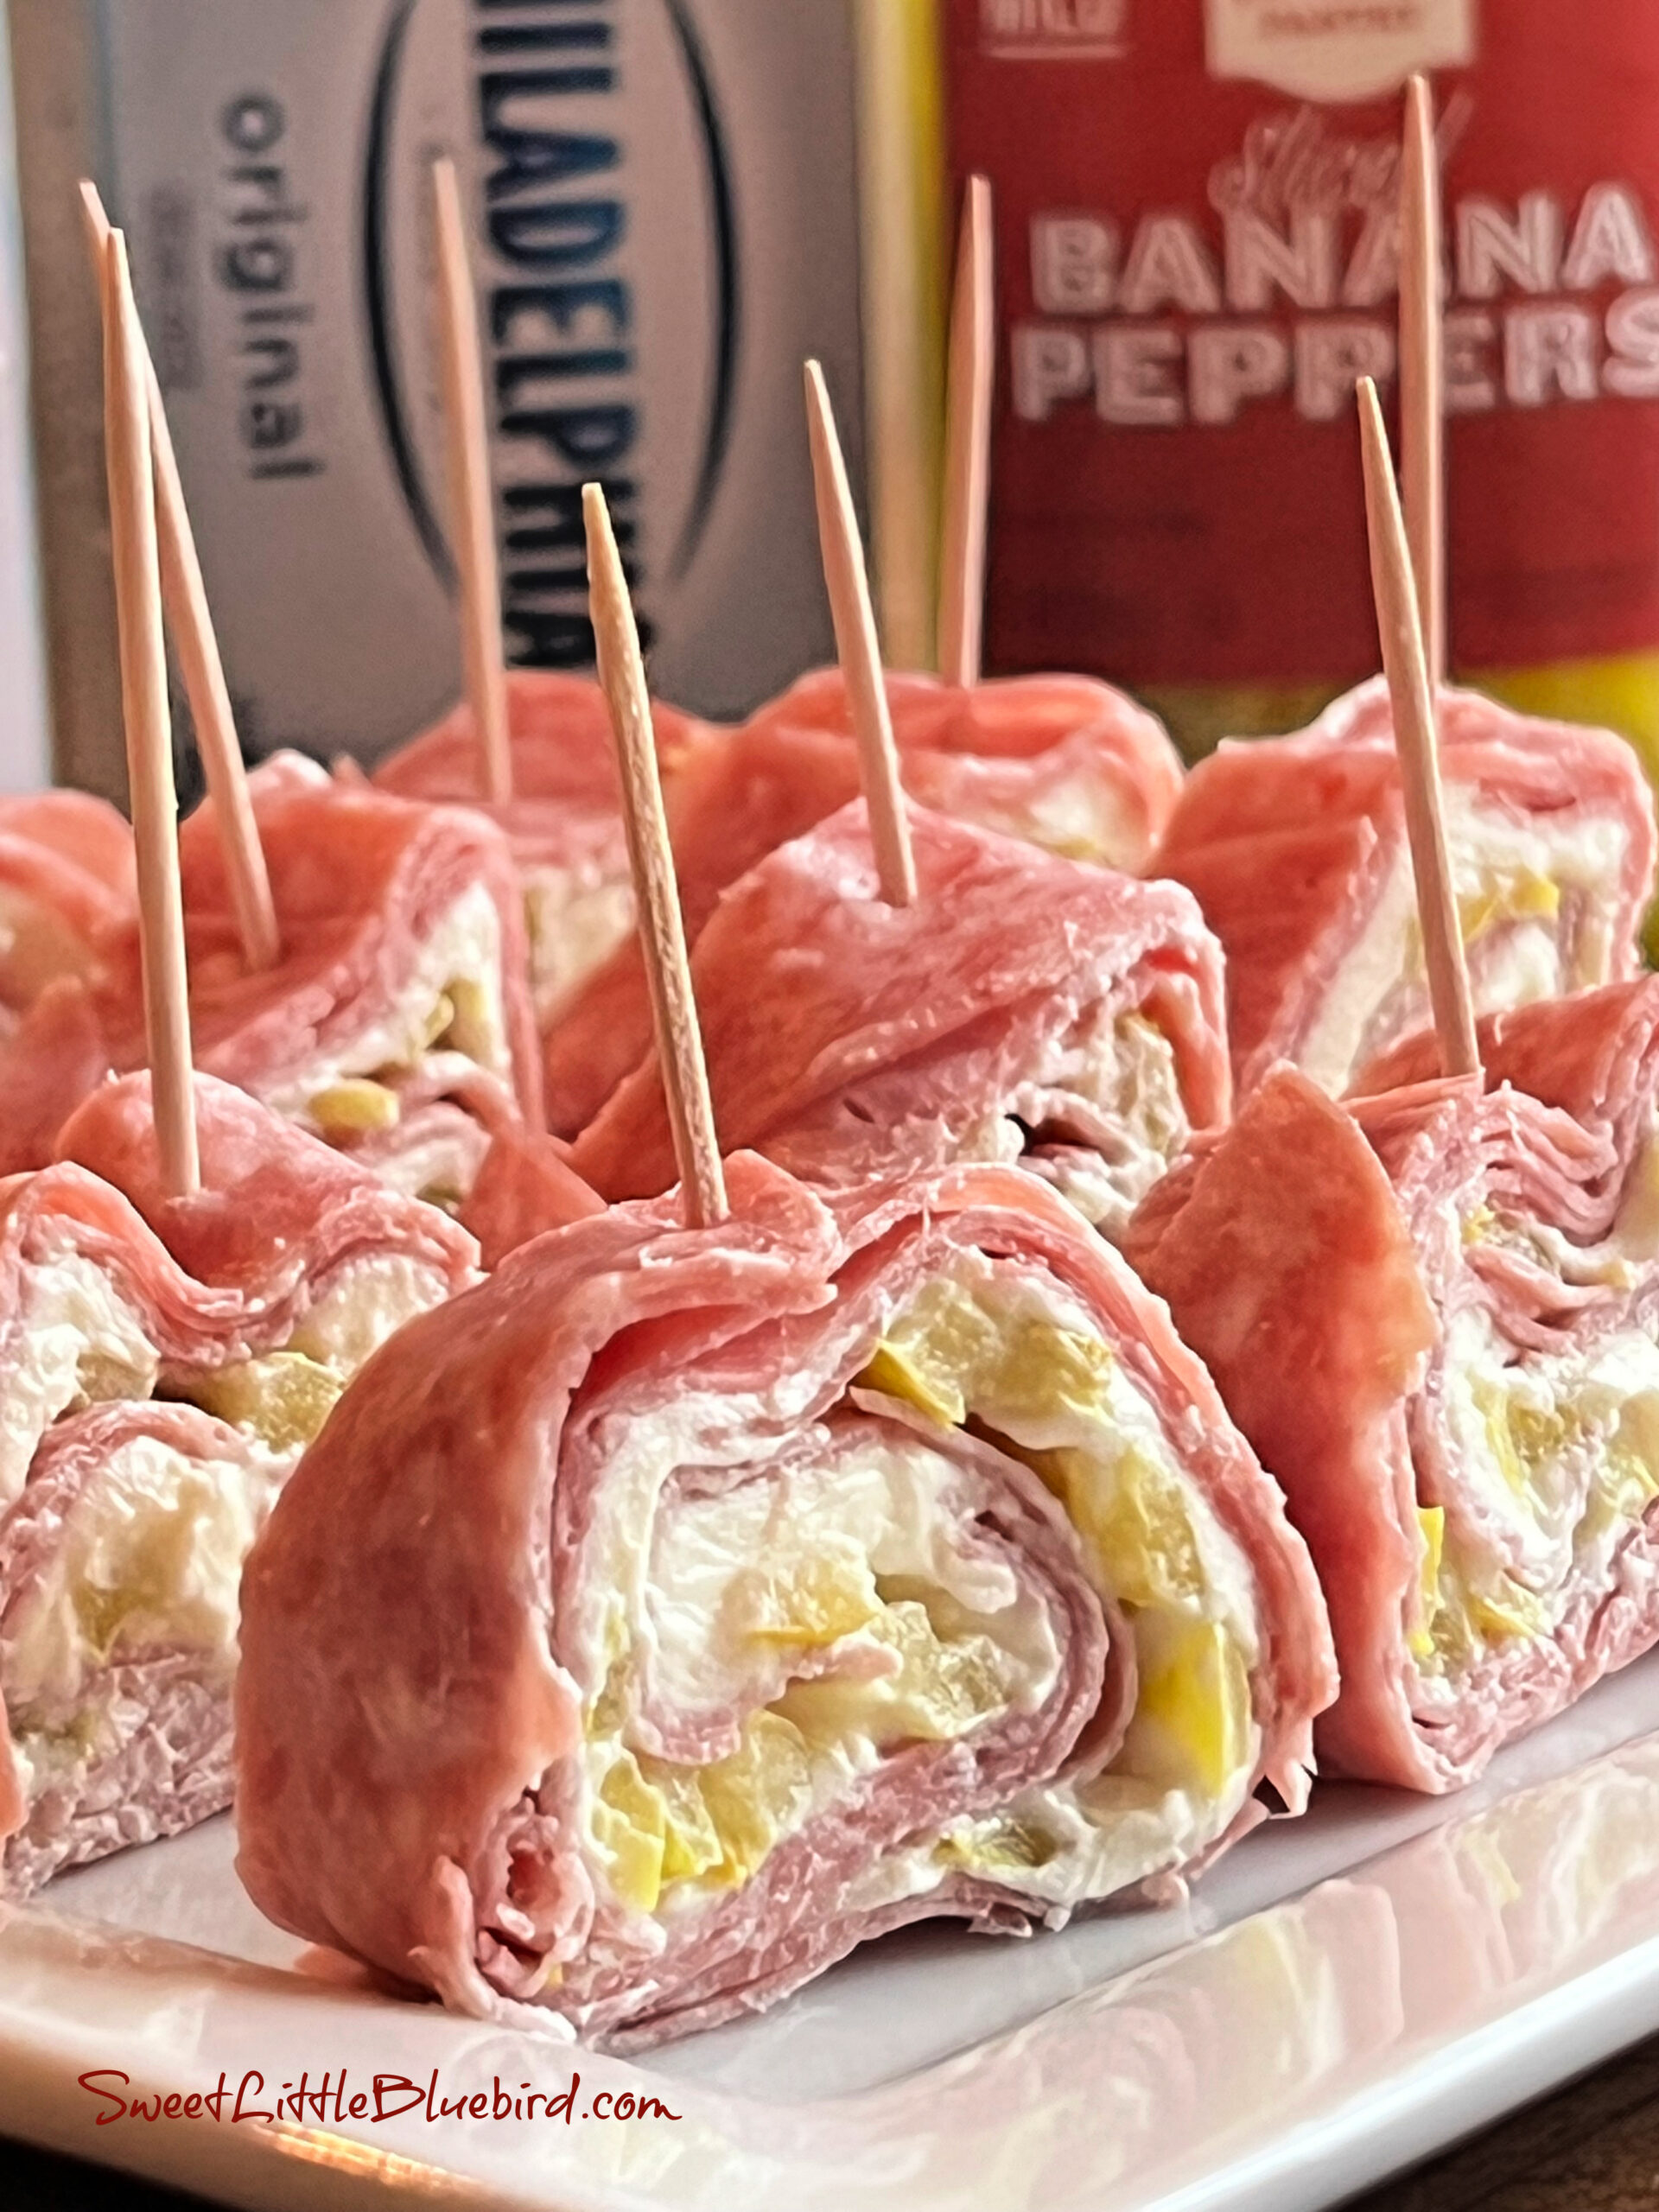 This photo shows the Salami Cream Cheese Roll-ups served on a white platter.